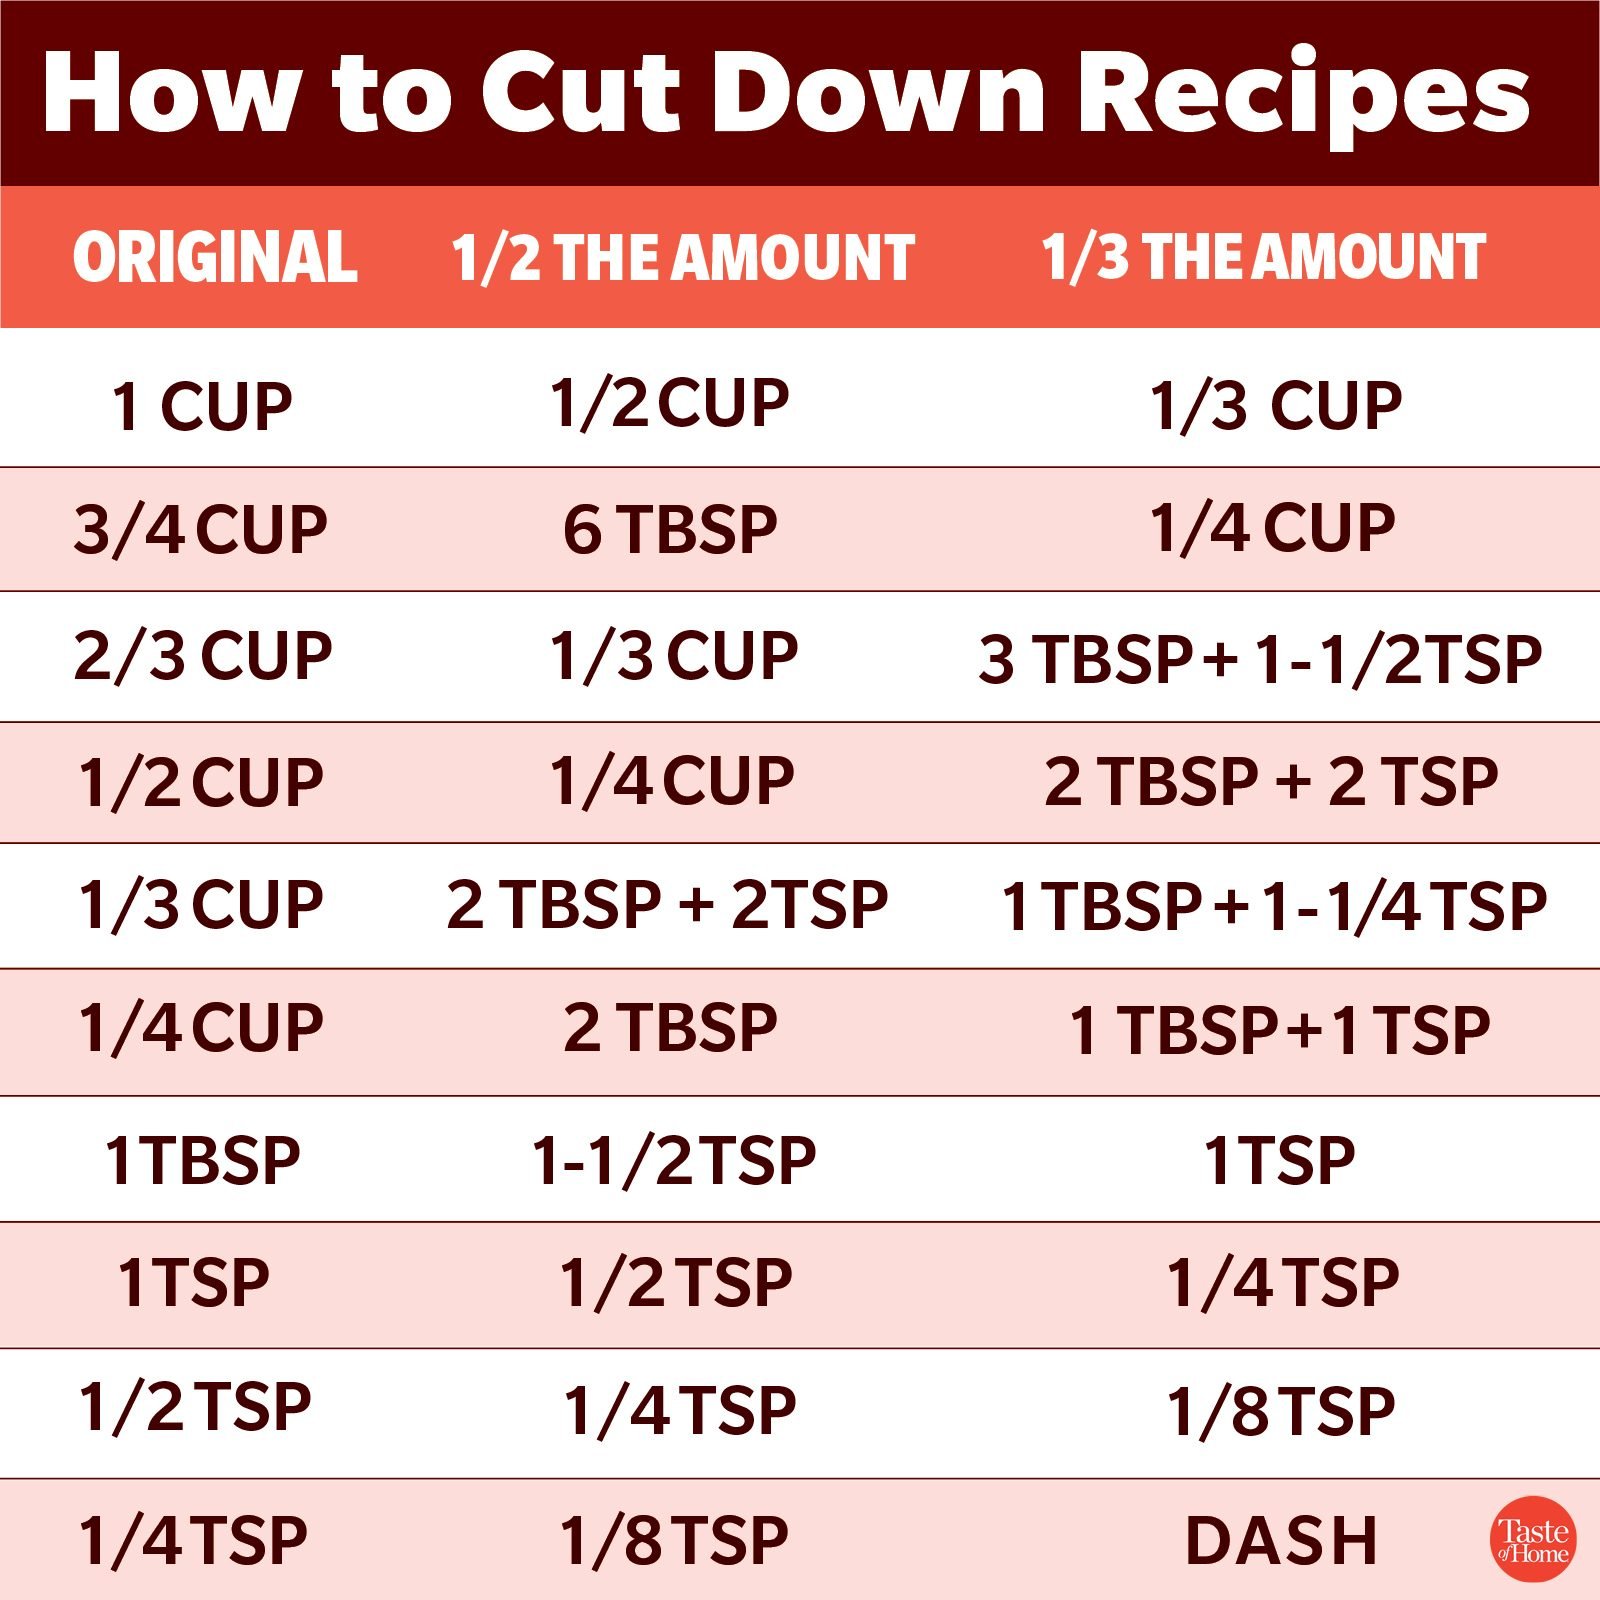 How to Cut Down Recipes for Half-, Third- or Quarter-Sized Batches